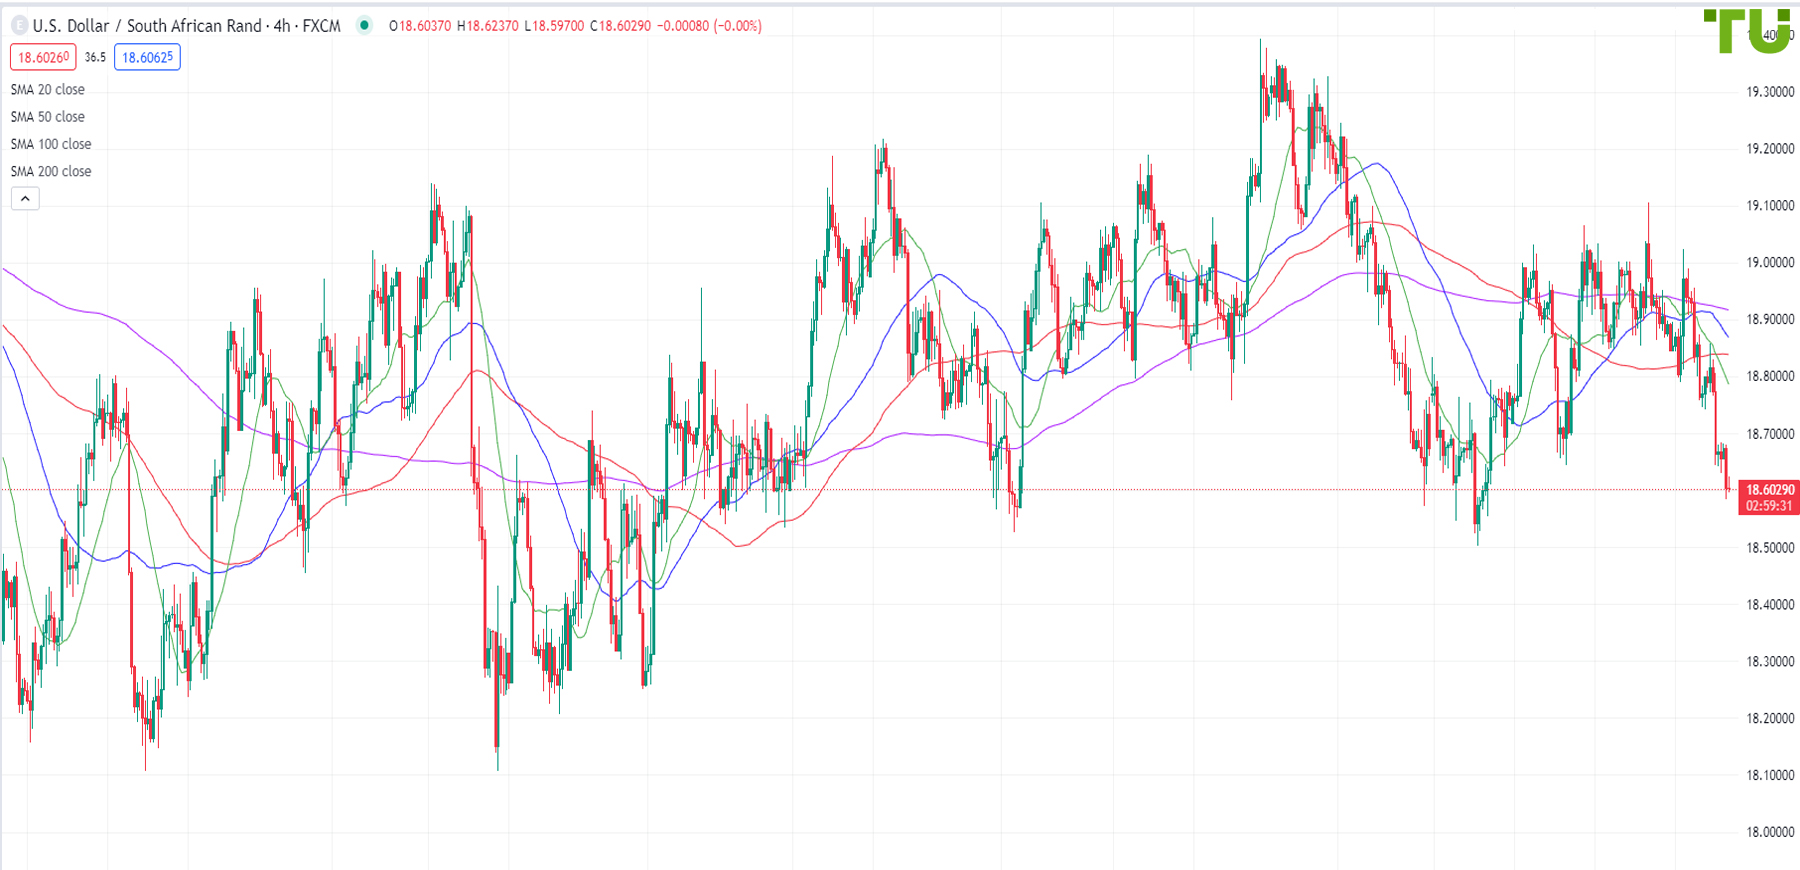 USD/ZAR is approaching strong support